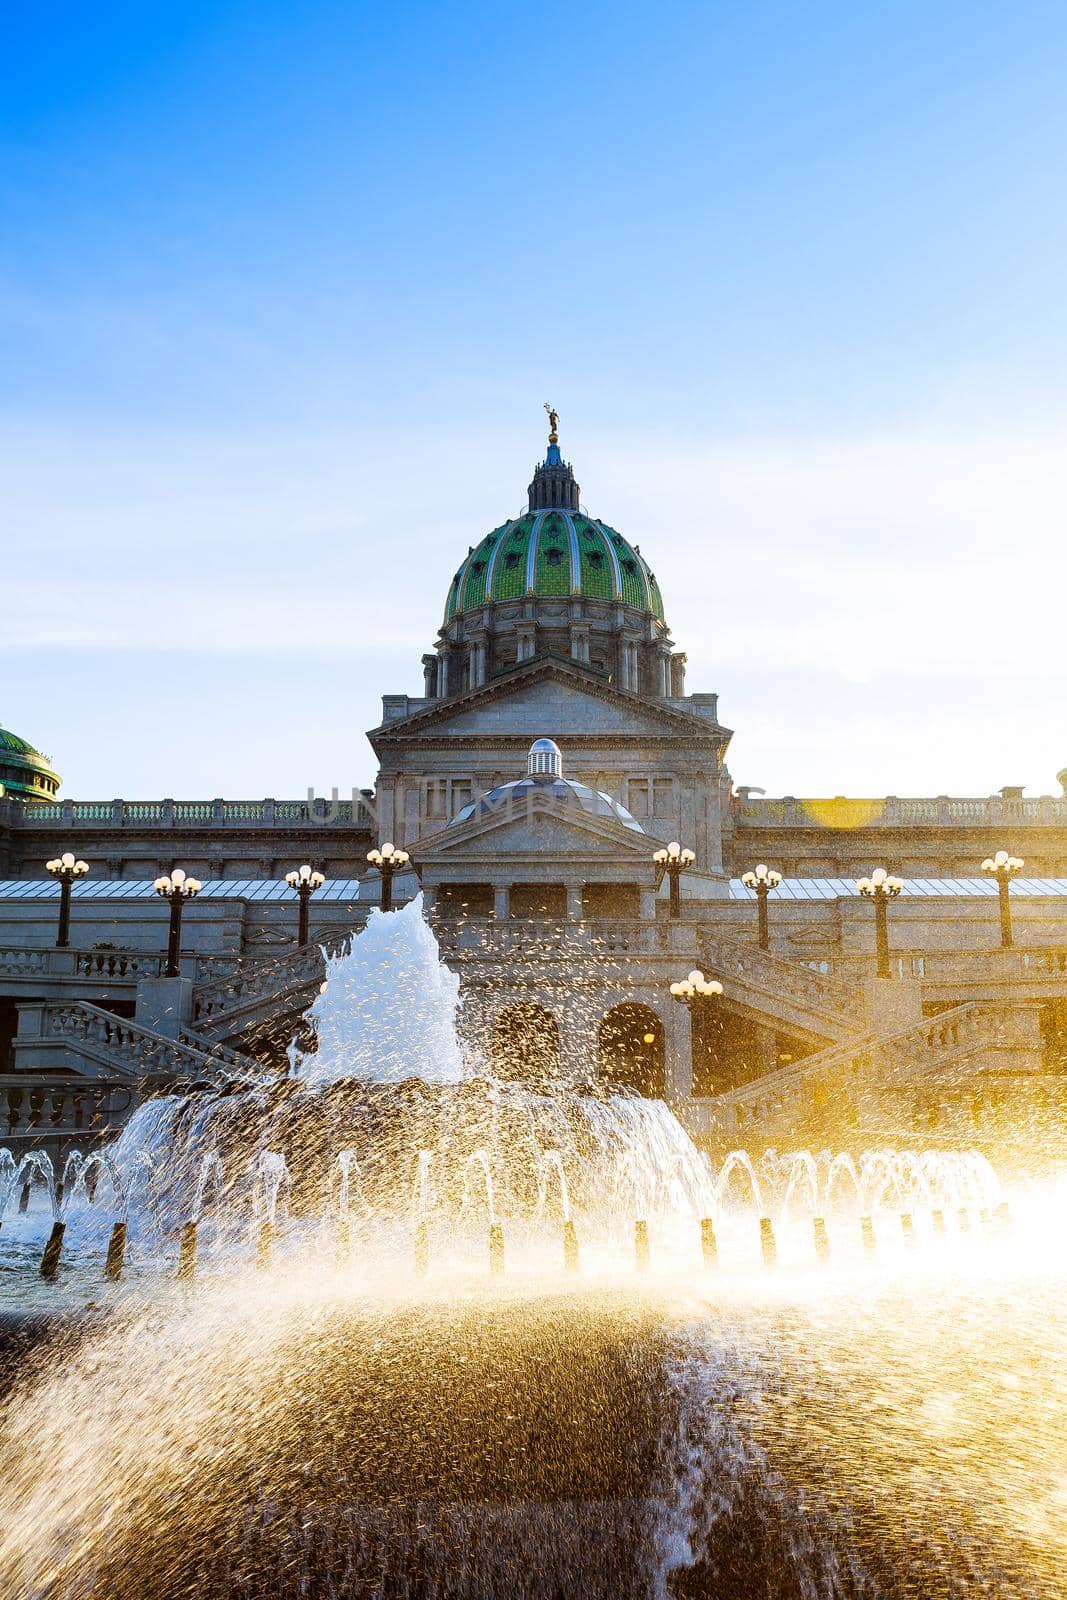 Pennsylvania capital building in Harrisburg. Back side of the with the fountain in the foreground. by ungvar